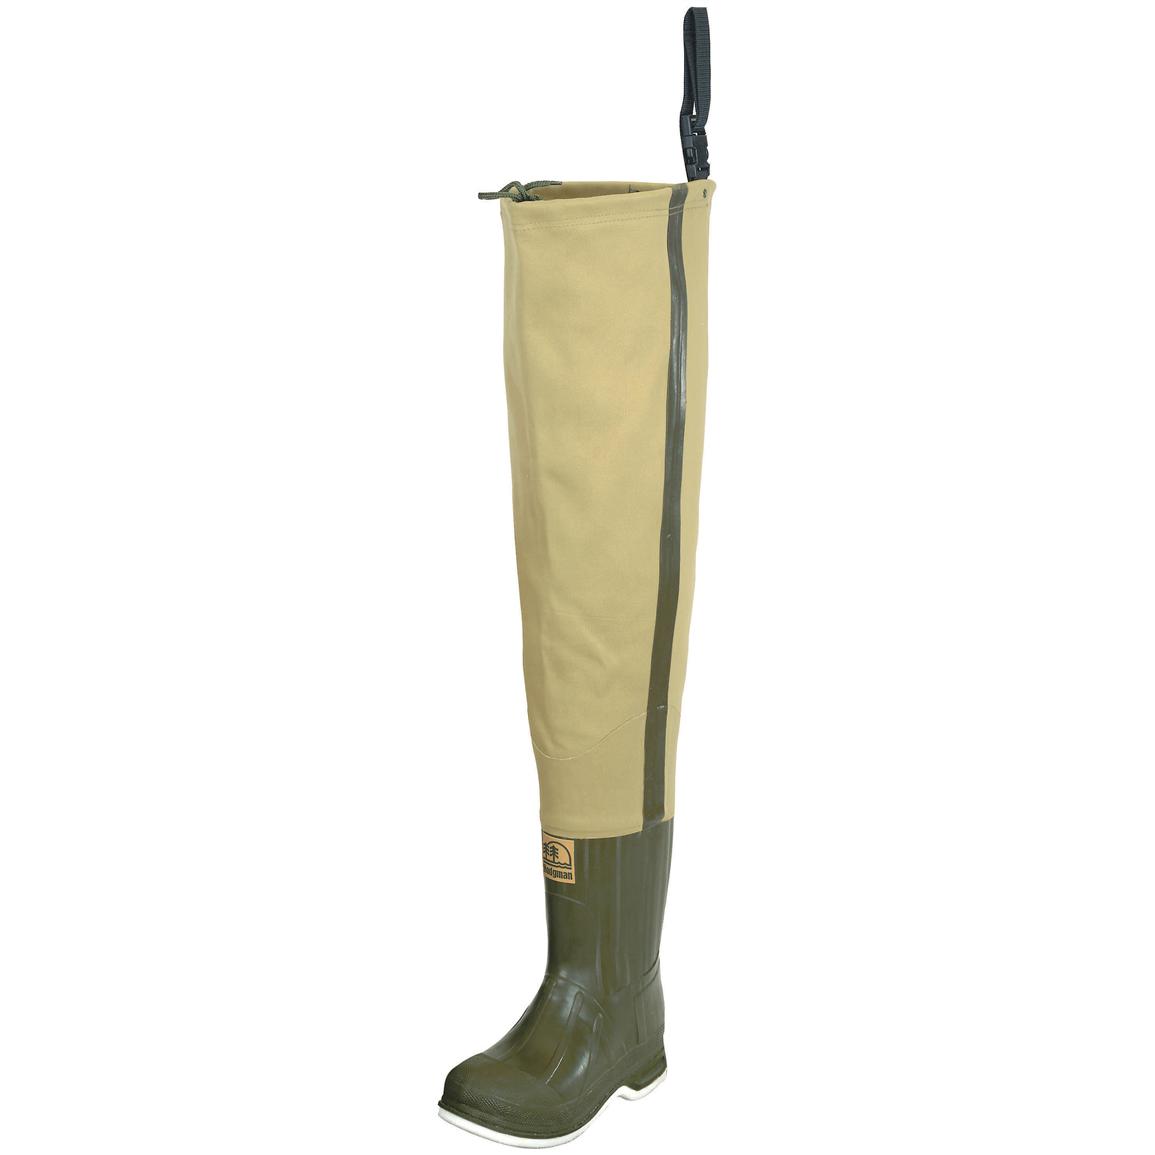 Details about   Hodgman Size  6 Wadewell Hip Waders 